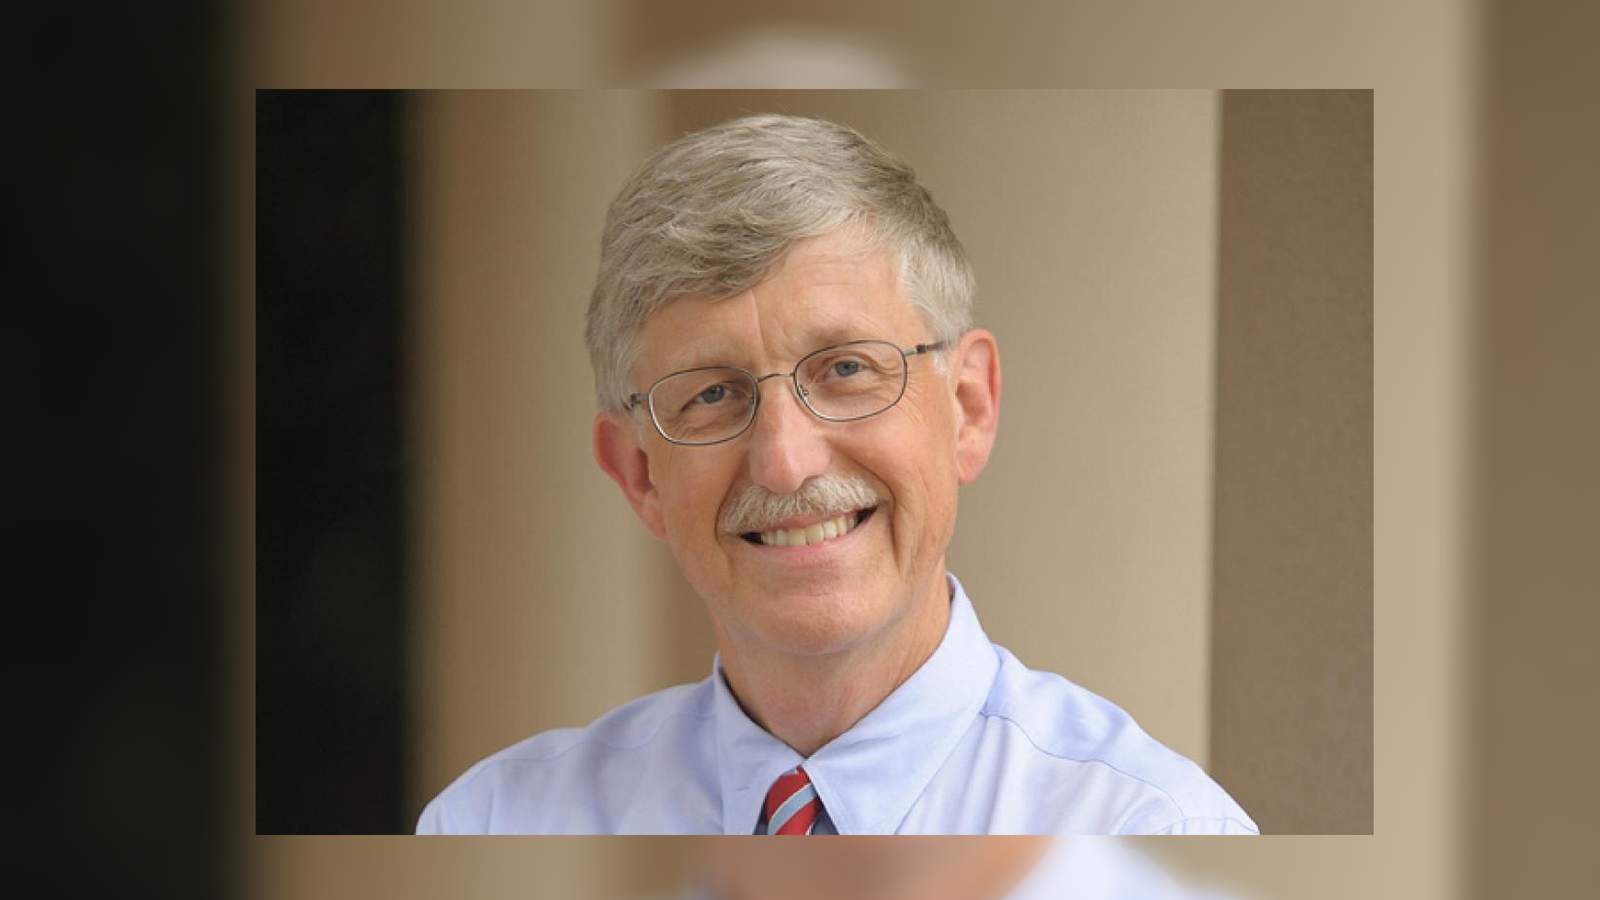 National Institutes of Health Director Francis Collins to speak at Virginia Tech’s virtual commencement